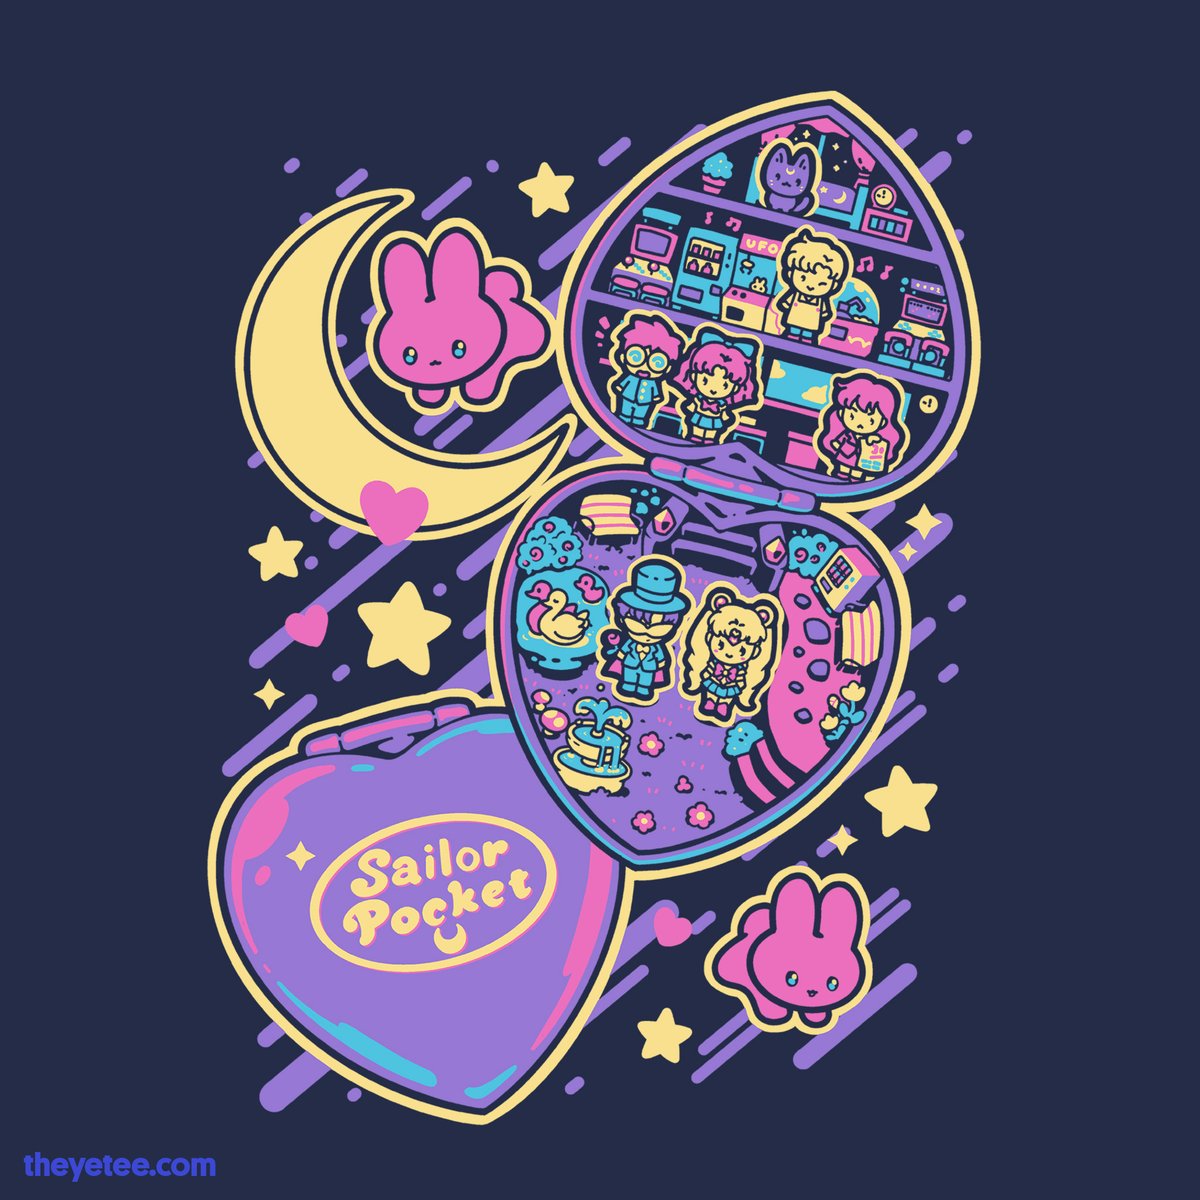 「Curioser and curioser! Designed by  #dai」|The Yetee 🌈のイラスト